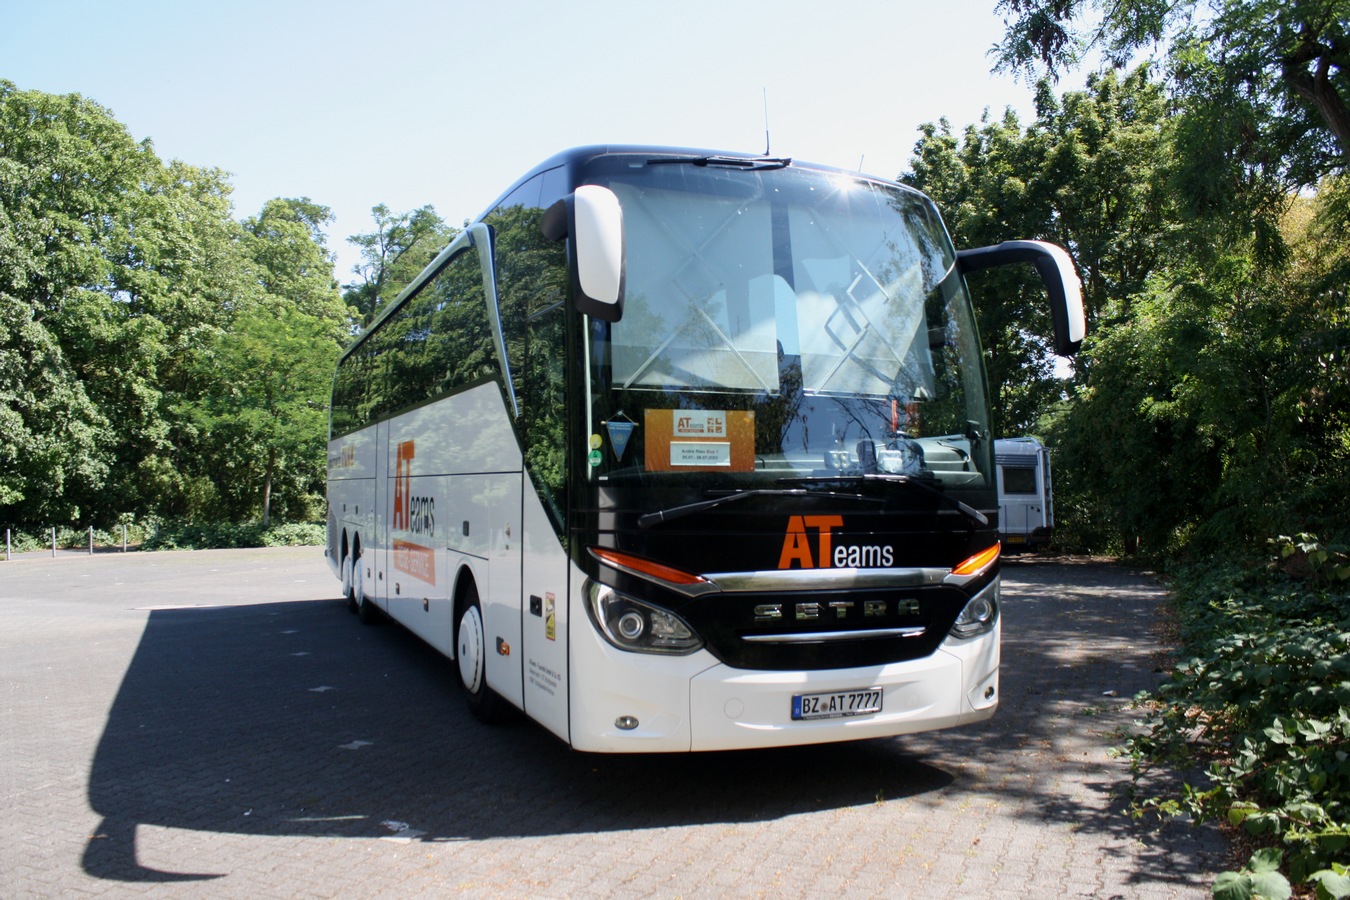 Setra S516 HDH #BZ-AT 7777